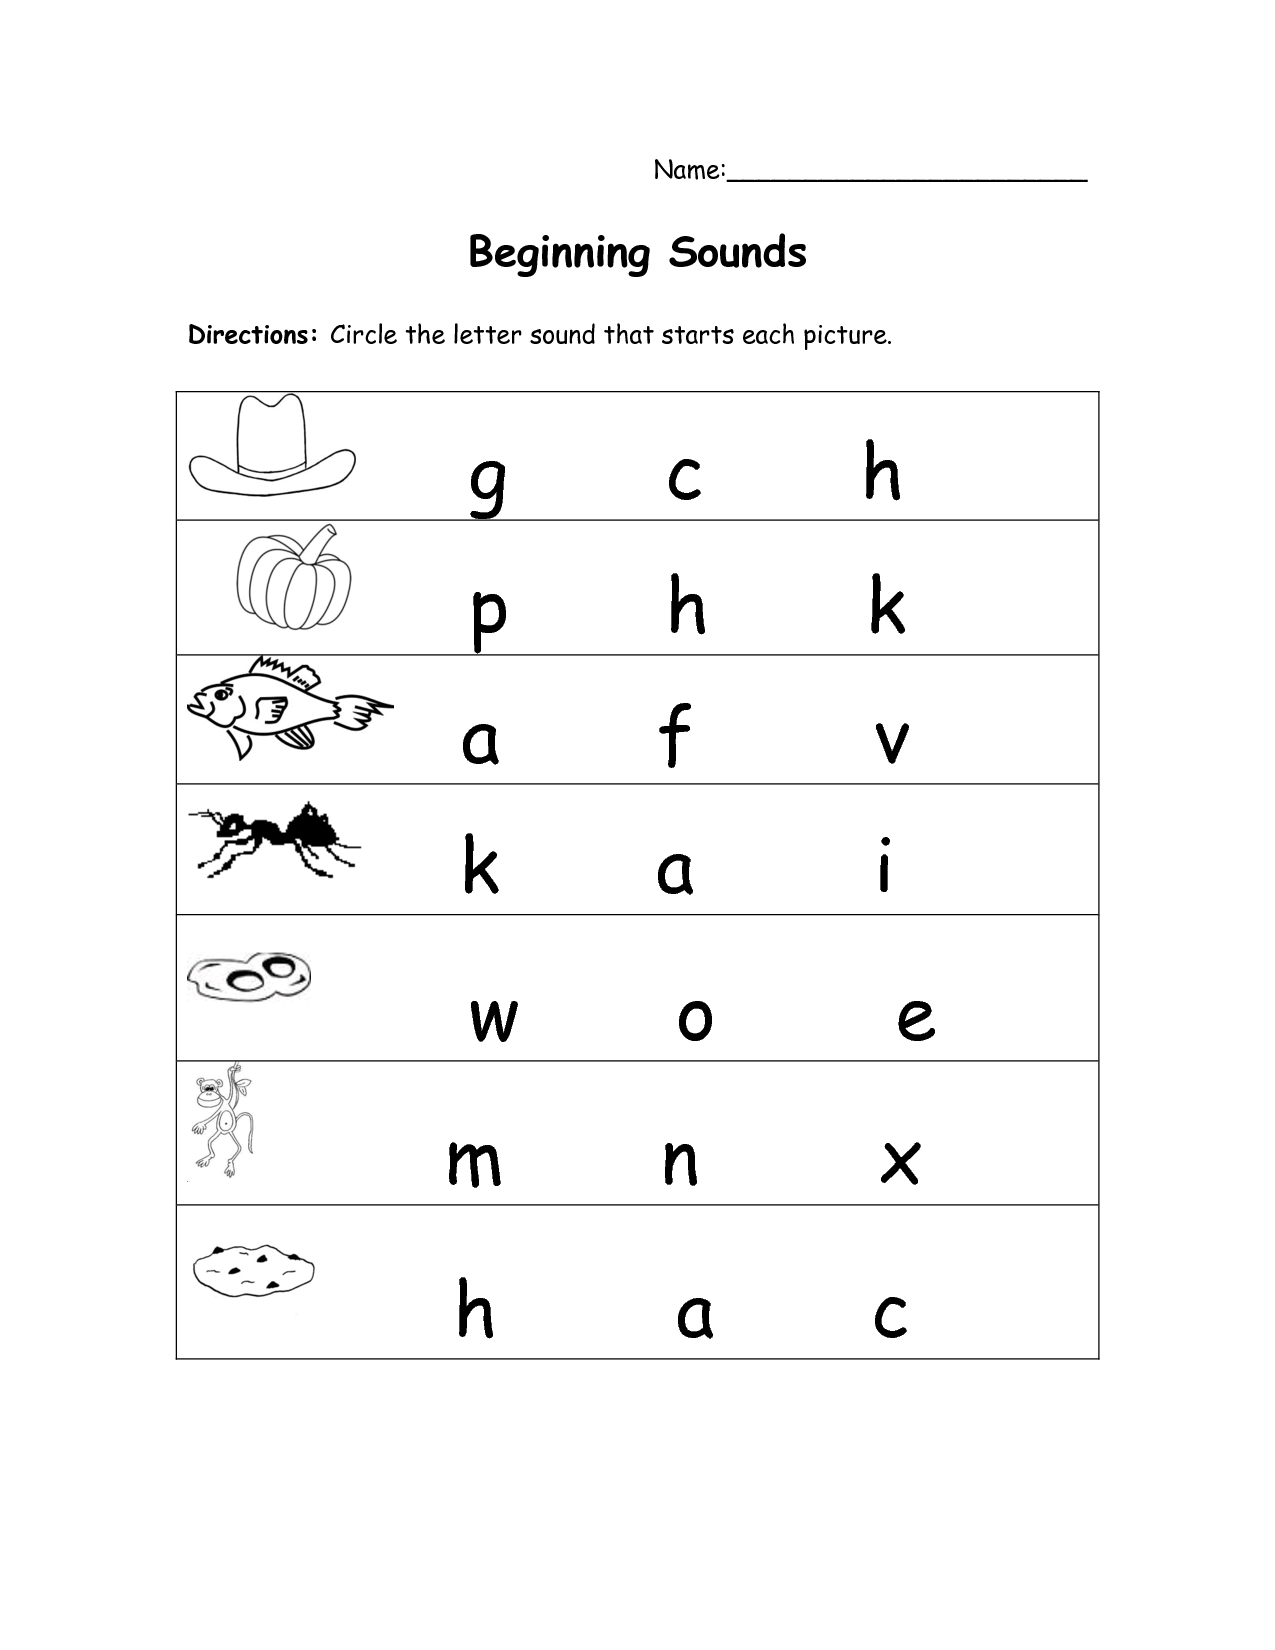 10 Best Images of Phonics Worksheets Letter A - With the ...